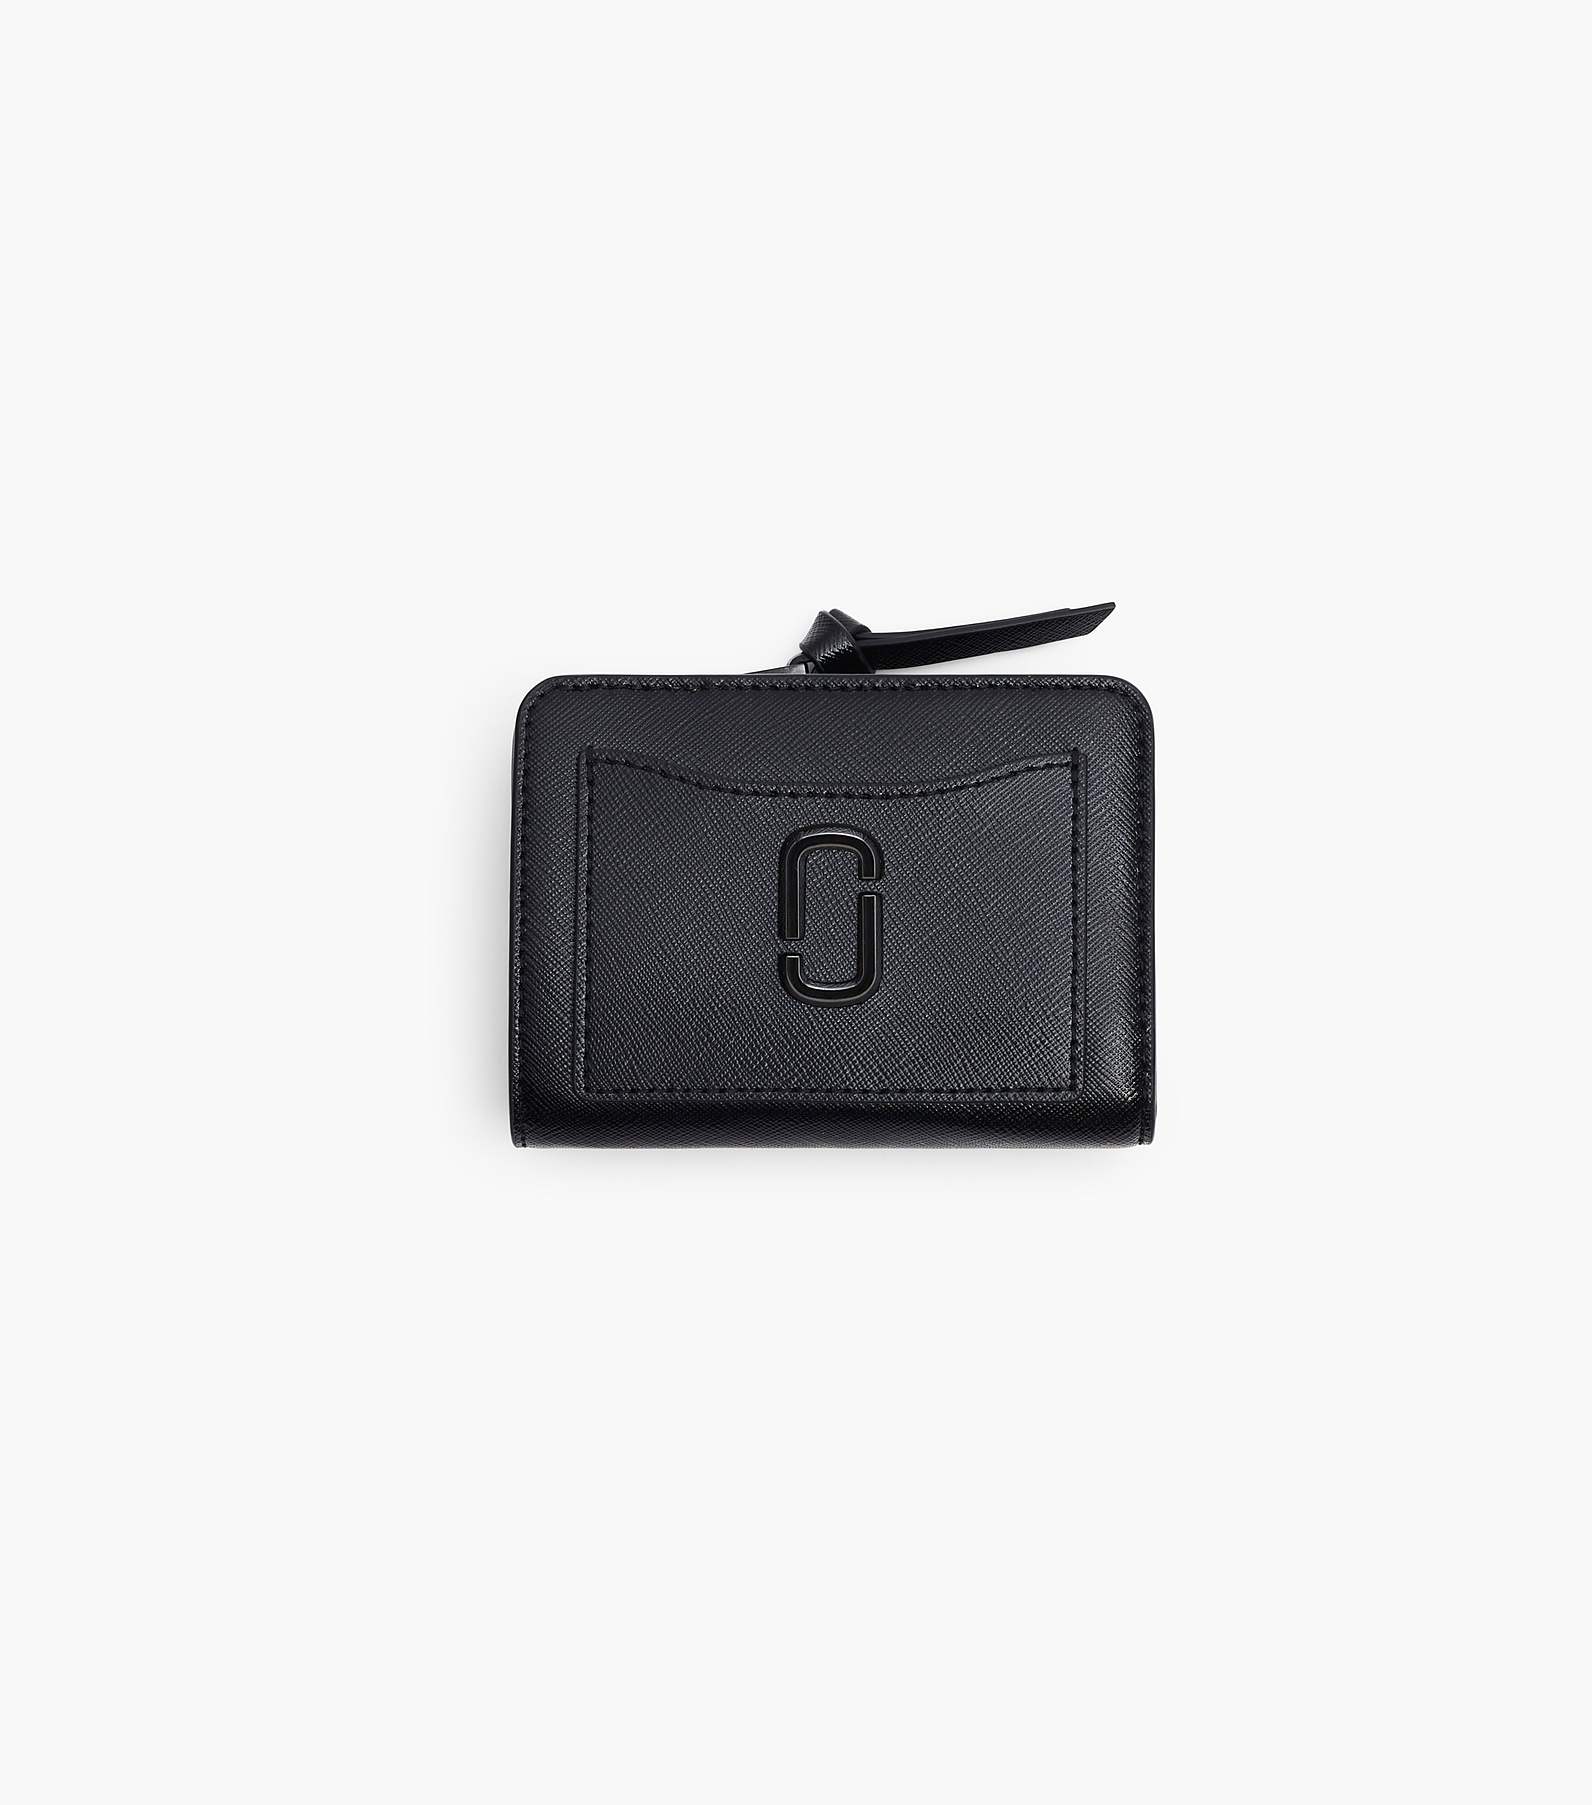 THE DTM UTILITY SNAPSHOT COMPACT WALLET MINI | マーク ジェイコブス ...